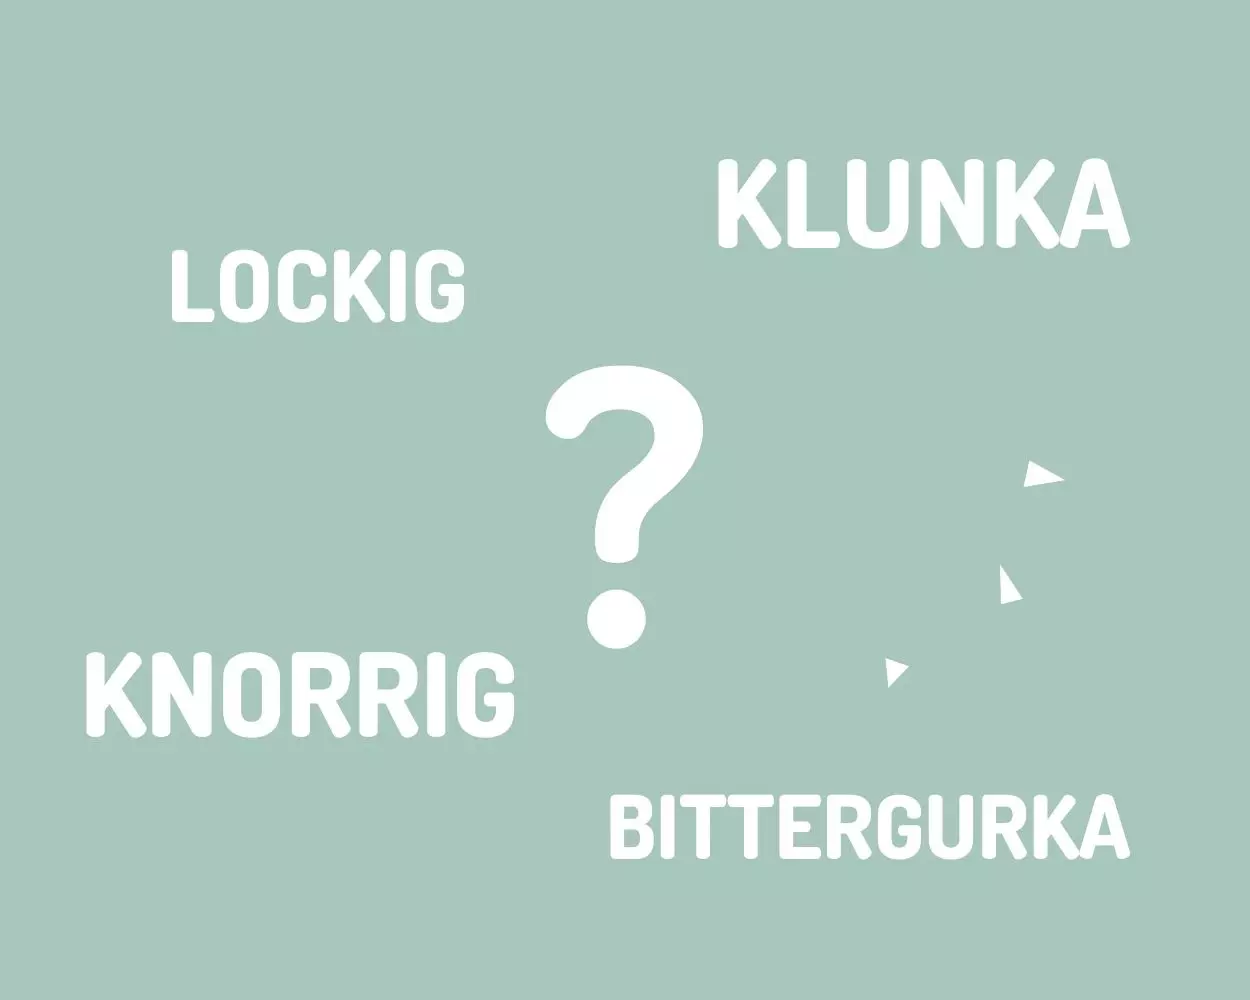 IKEA names: The system behind the product names